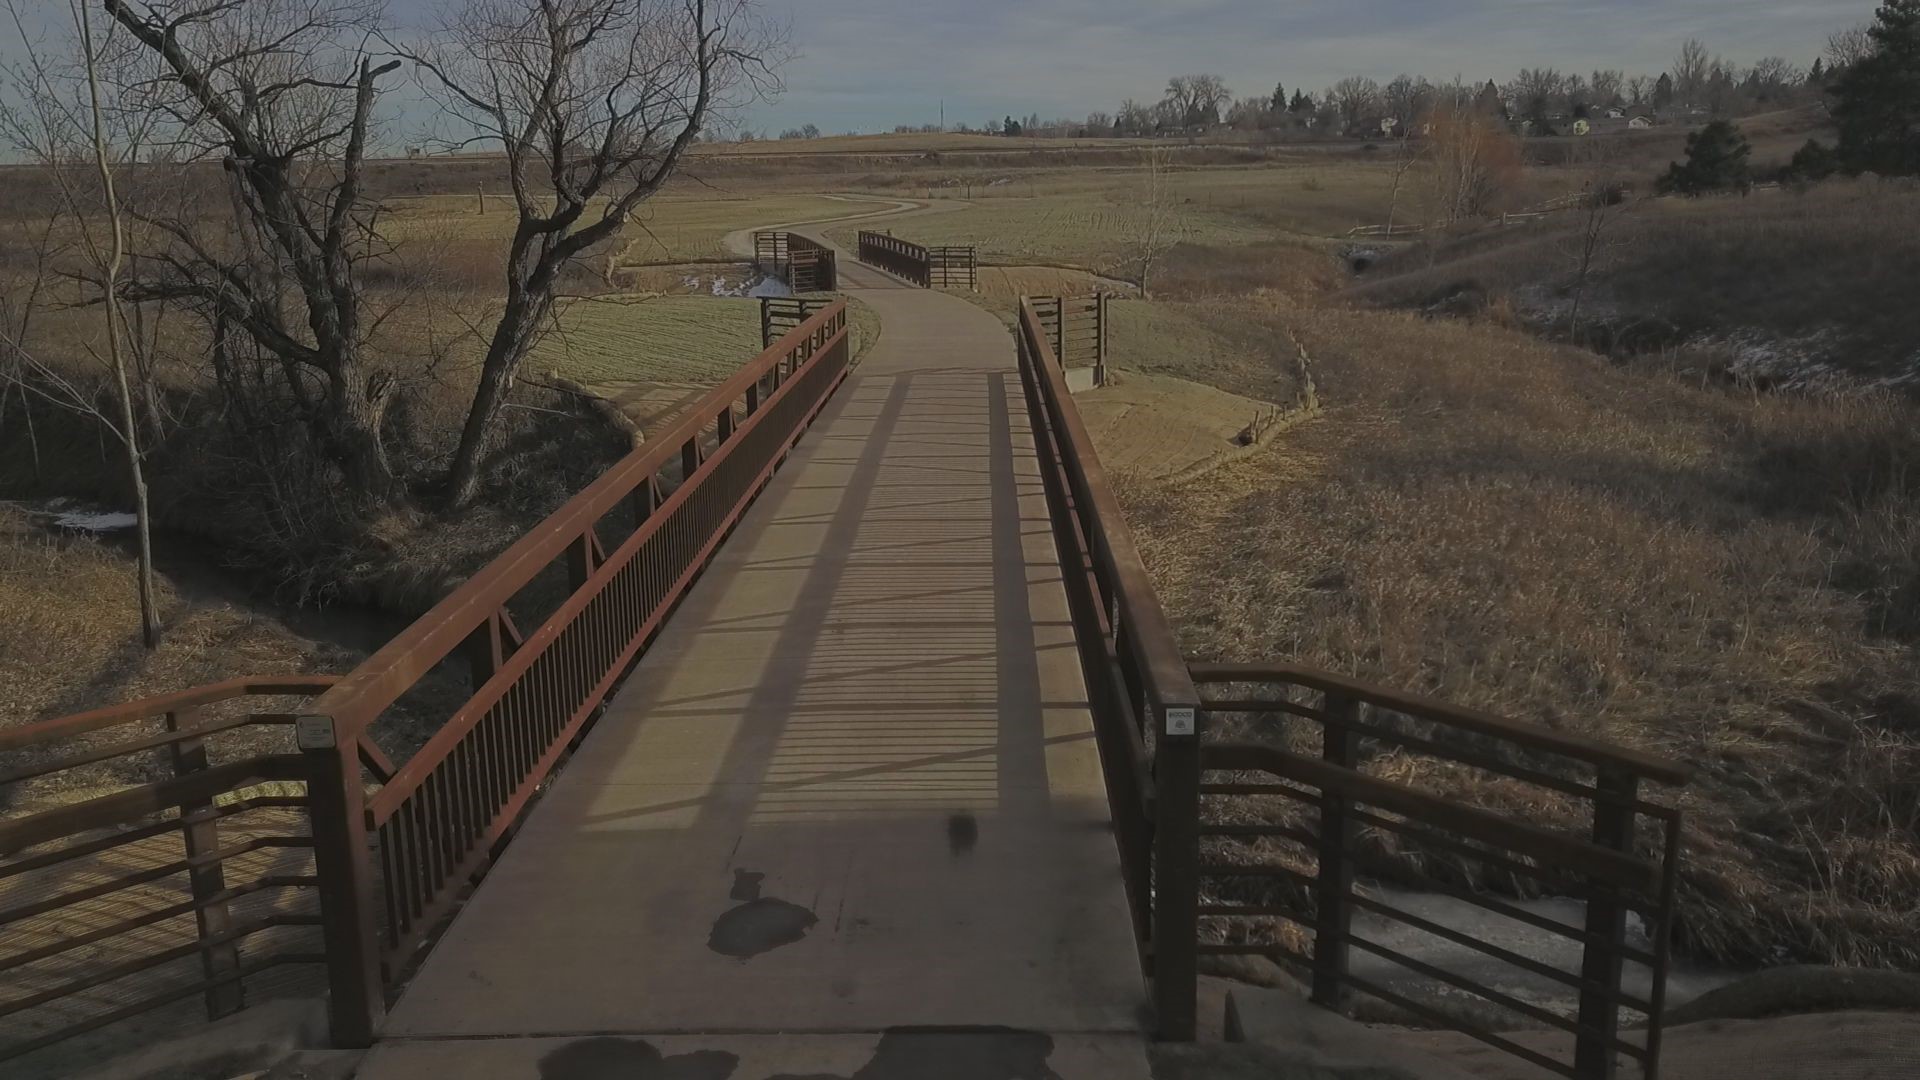 The final section of the Fossil Creek Trail opened Monday, completing the "missing link" in the Fort Collins trail system. Take this peaceful virtual stroll along it.